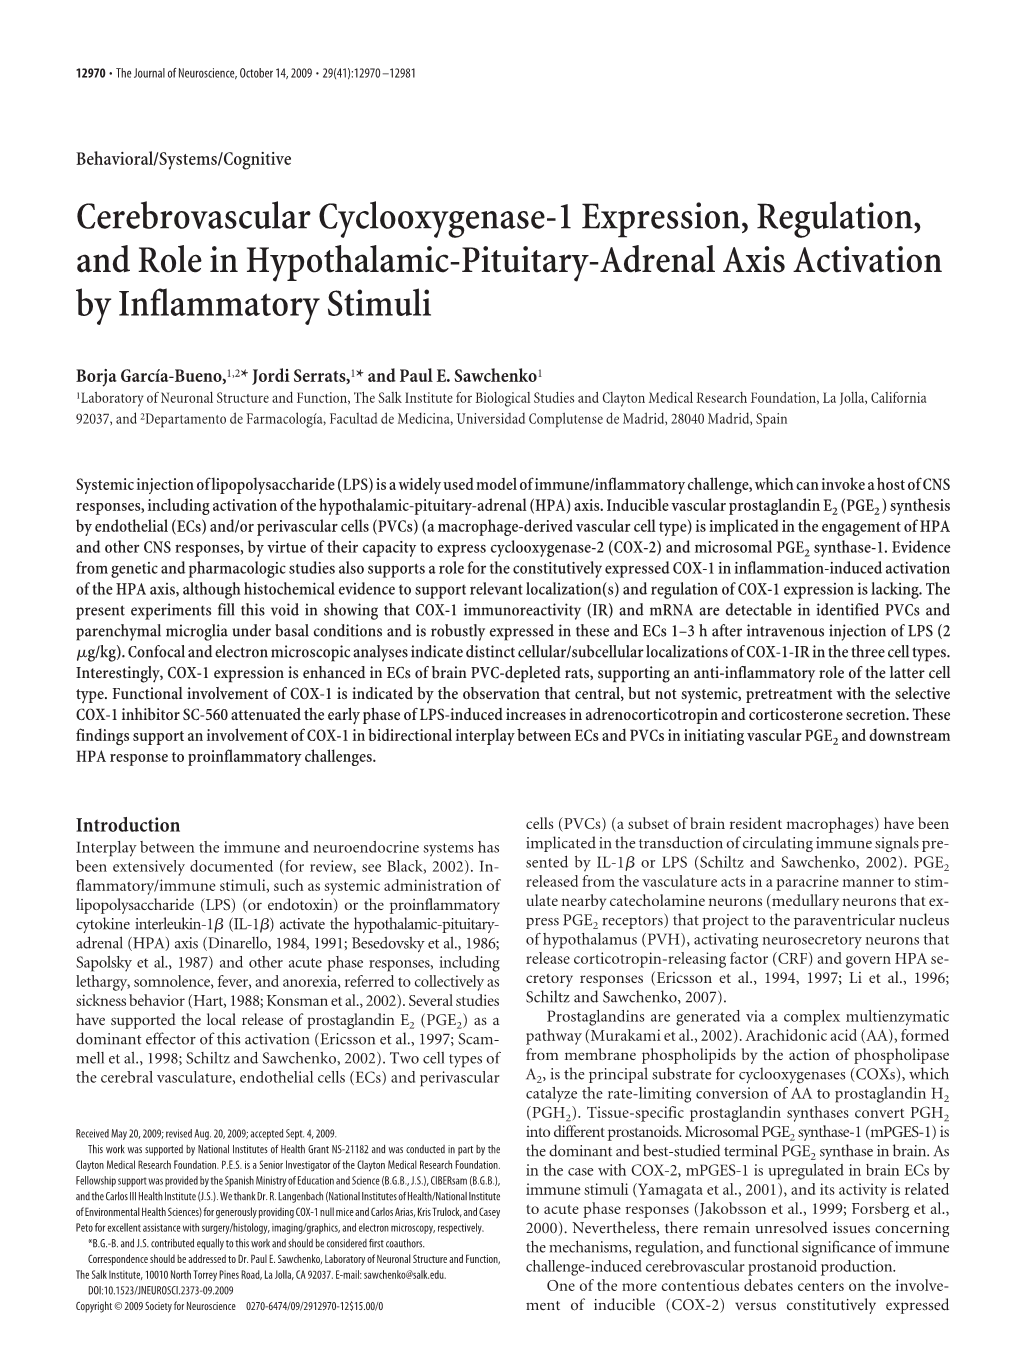 Cerebrovascular Cyclooxygenase-1 Expression, Regulation, and Role in Hypothalamic-Pituitary-Adrenal Axis Activation by Inflammatory Stimuli